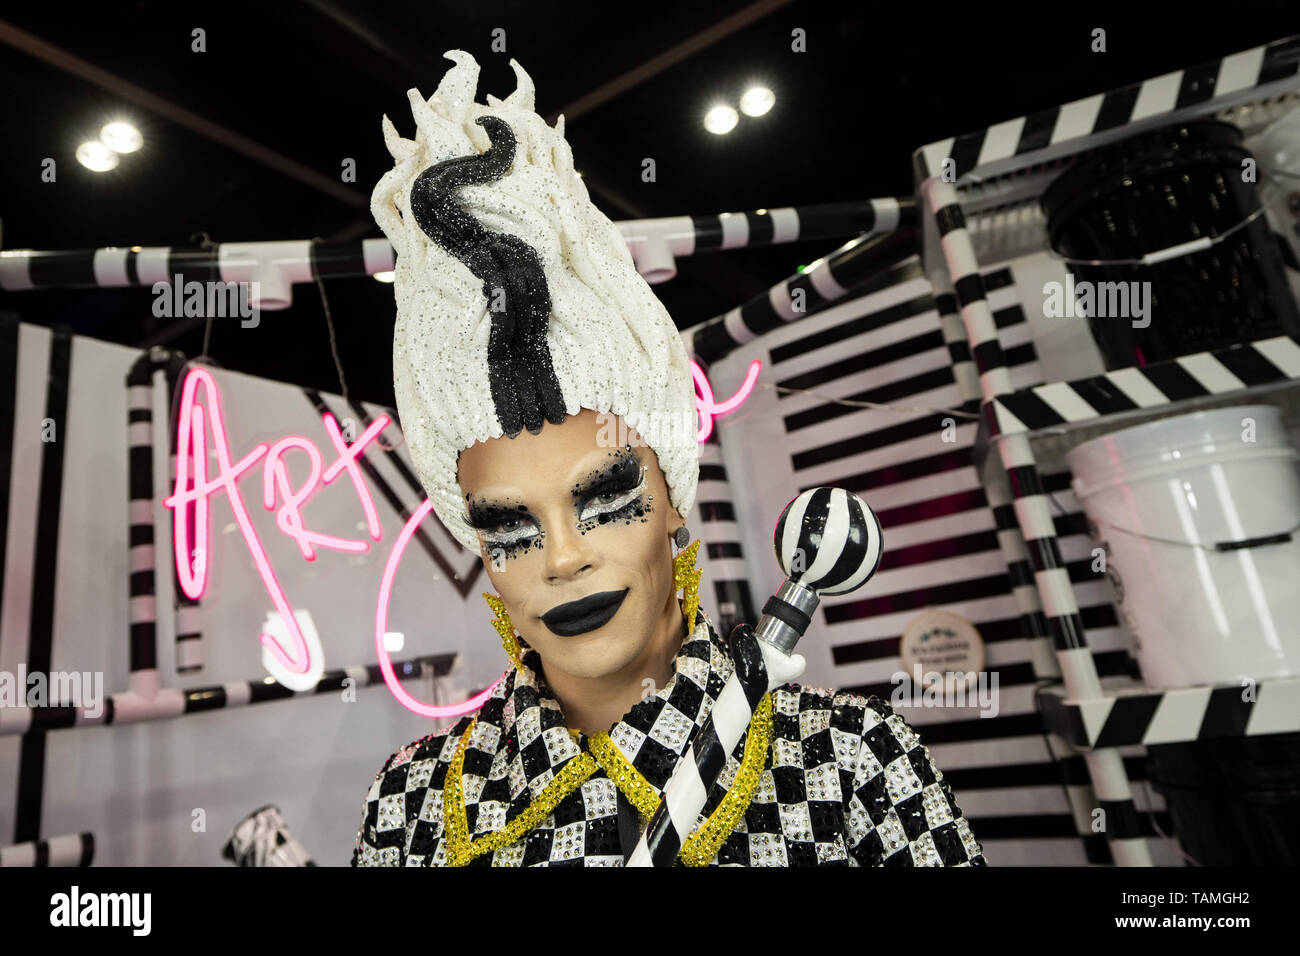 Los Angeles, California, USA. 15th Mar, 2019. Art Simone poses for a portrait at RuPaul's DragCon LA 2019 at the Los Angeles Convention Center in Los Angeles, California. The annual three-day RuPaul's DragCon is the world's largest drag culture convention and takes place in New York and Los Angeles. Credit: Ronen Tivony/SOPA Images/ZUMA Wire/Alamy Live News Stock Photo